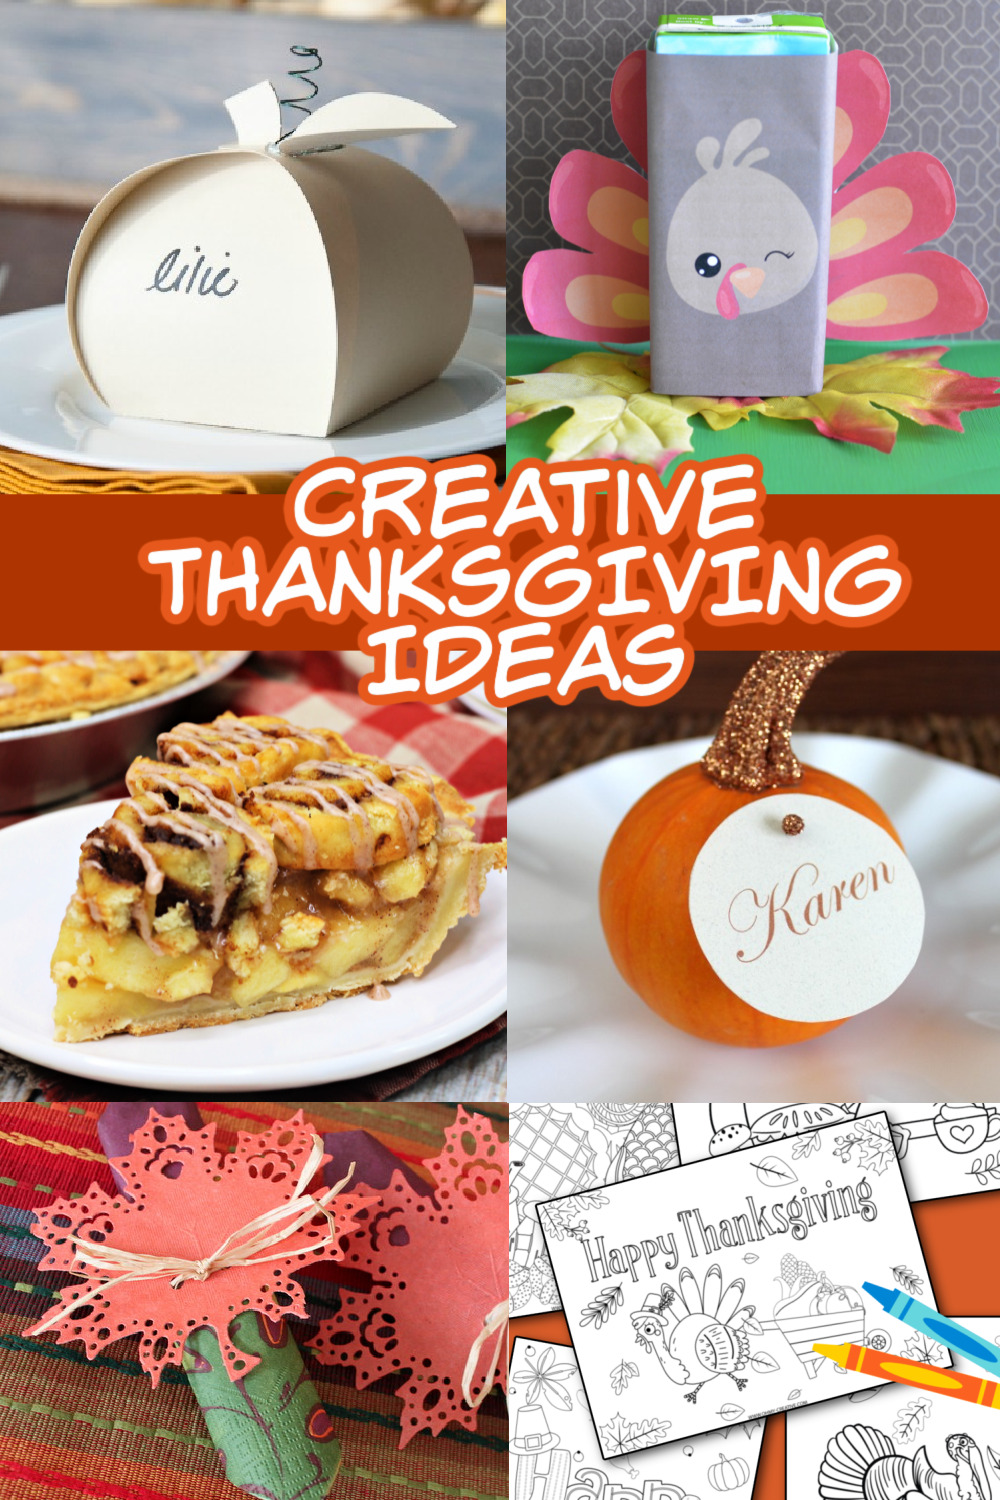 A collage of creative thanksgiving ideas to make Thanksgiving special.